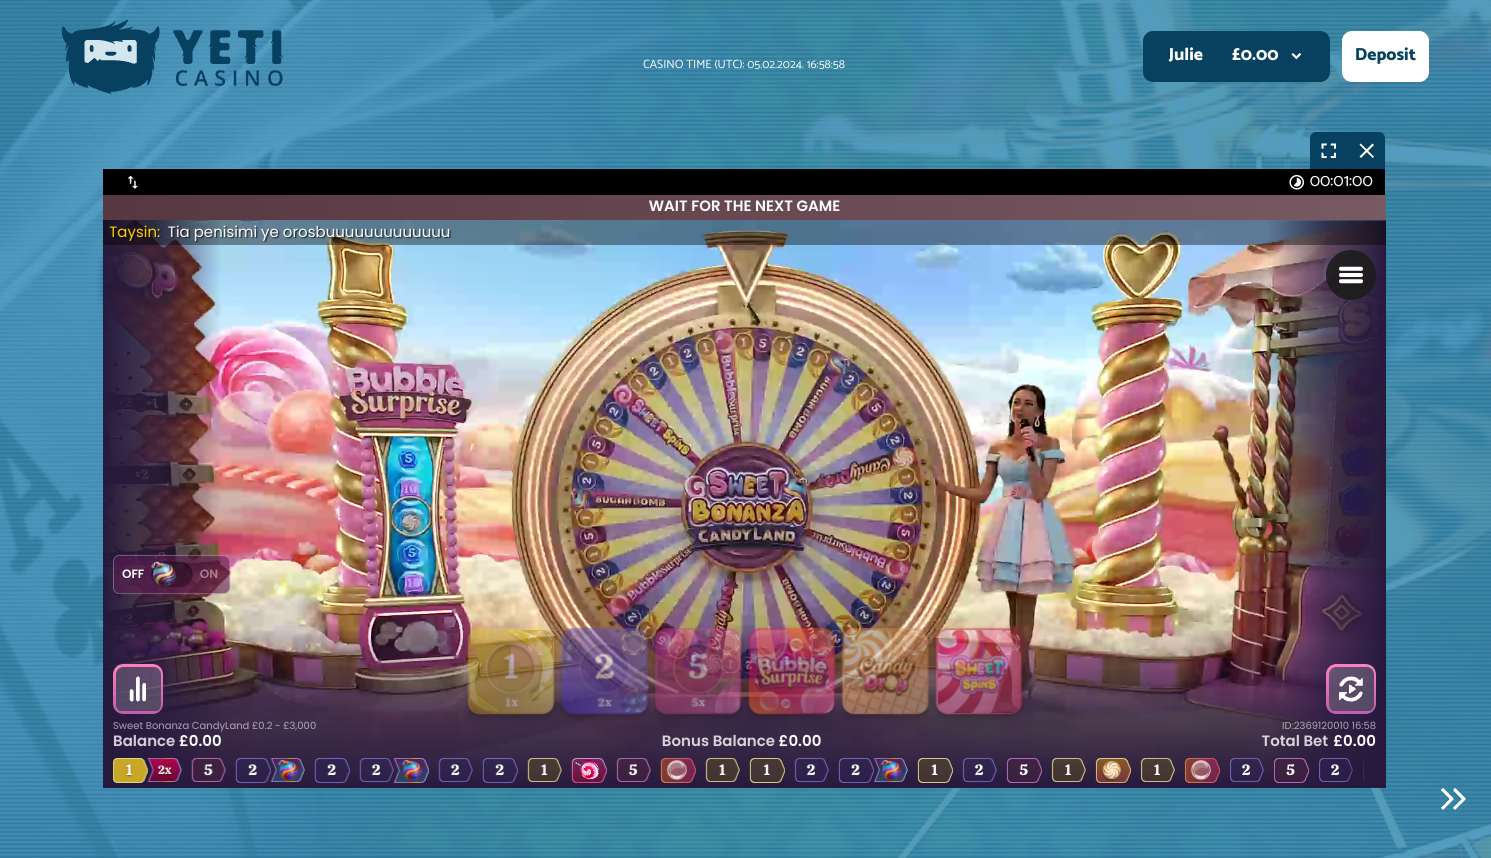 Spin the wheel games at Yeti Casino